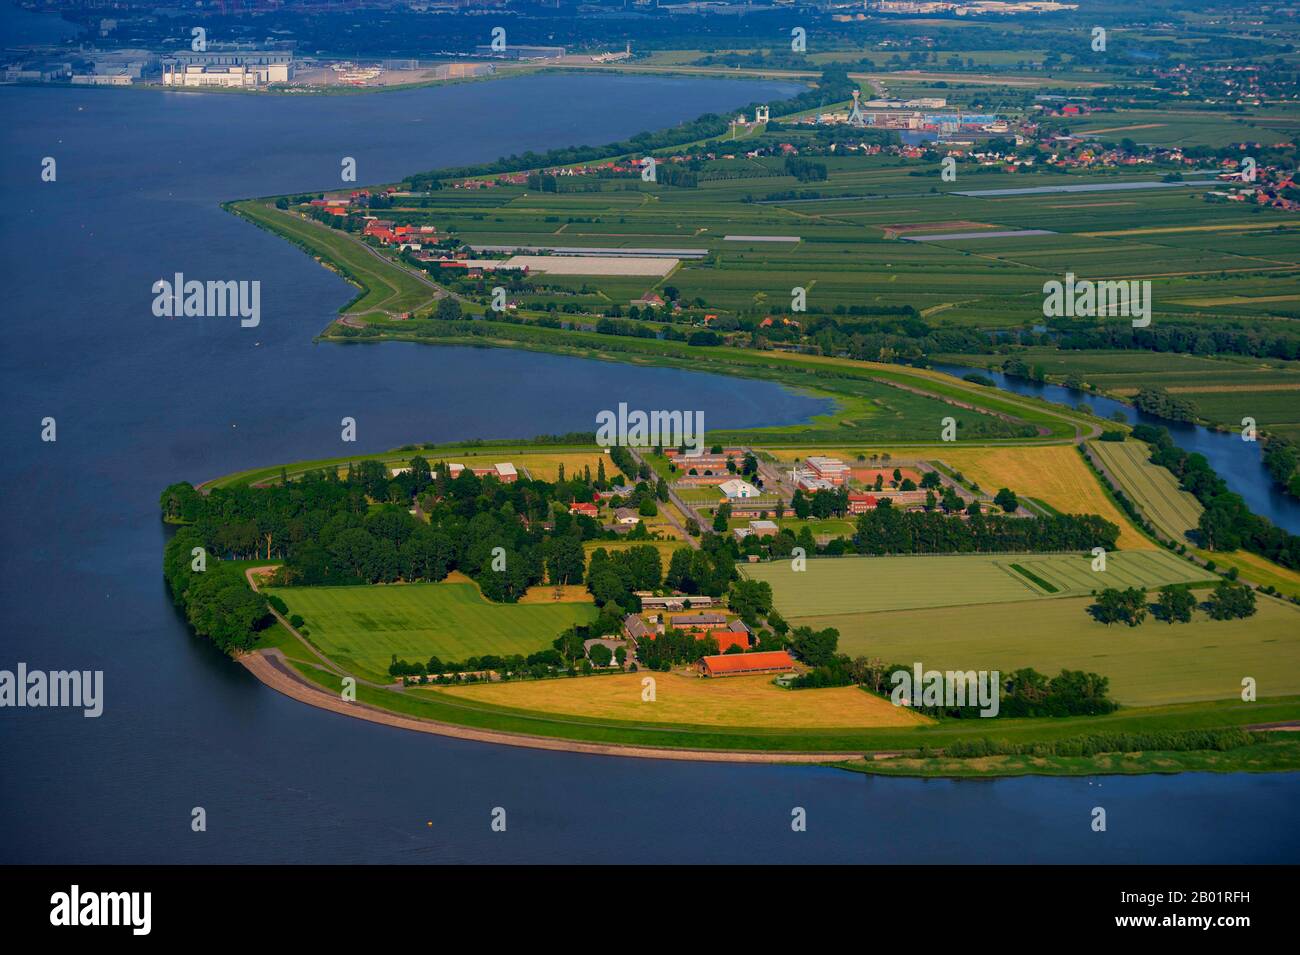 prison on Hahnoefersand Island, Muehlenberger Loch in background, aerial view, Germany, Lower Saxony Stock Photo